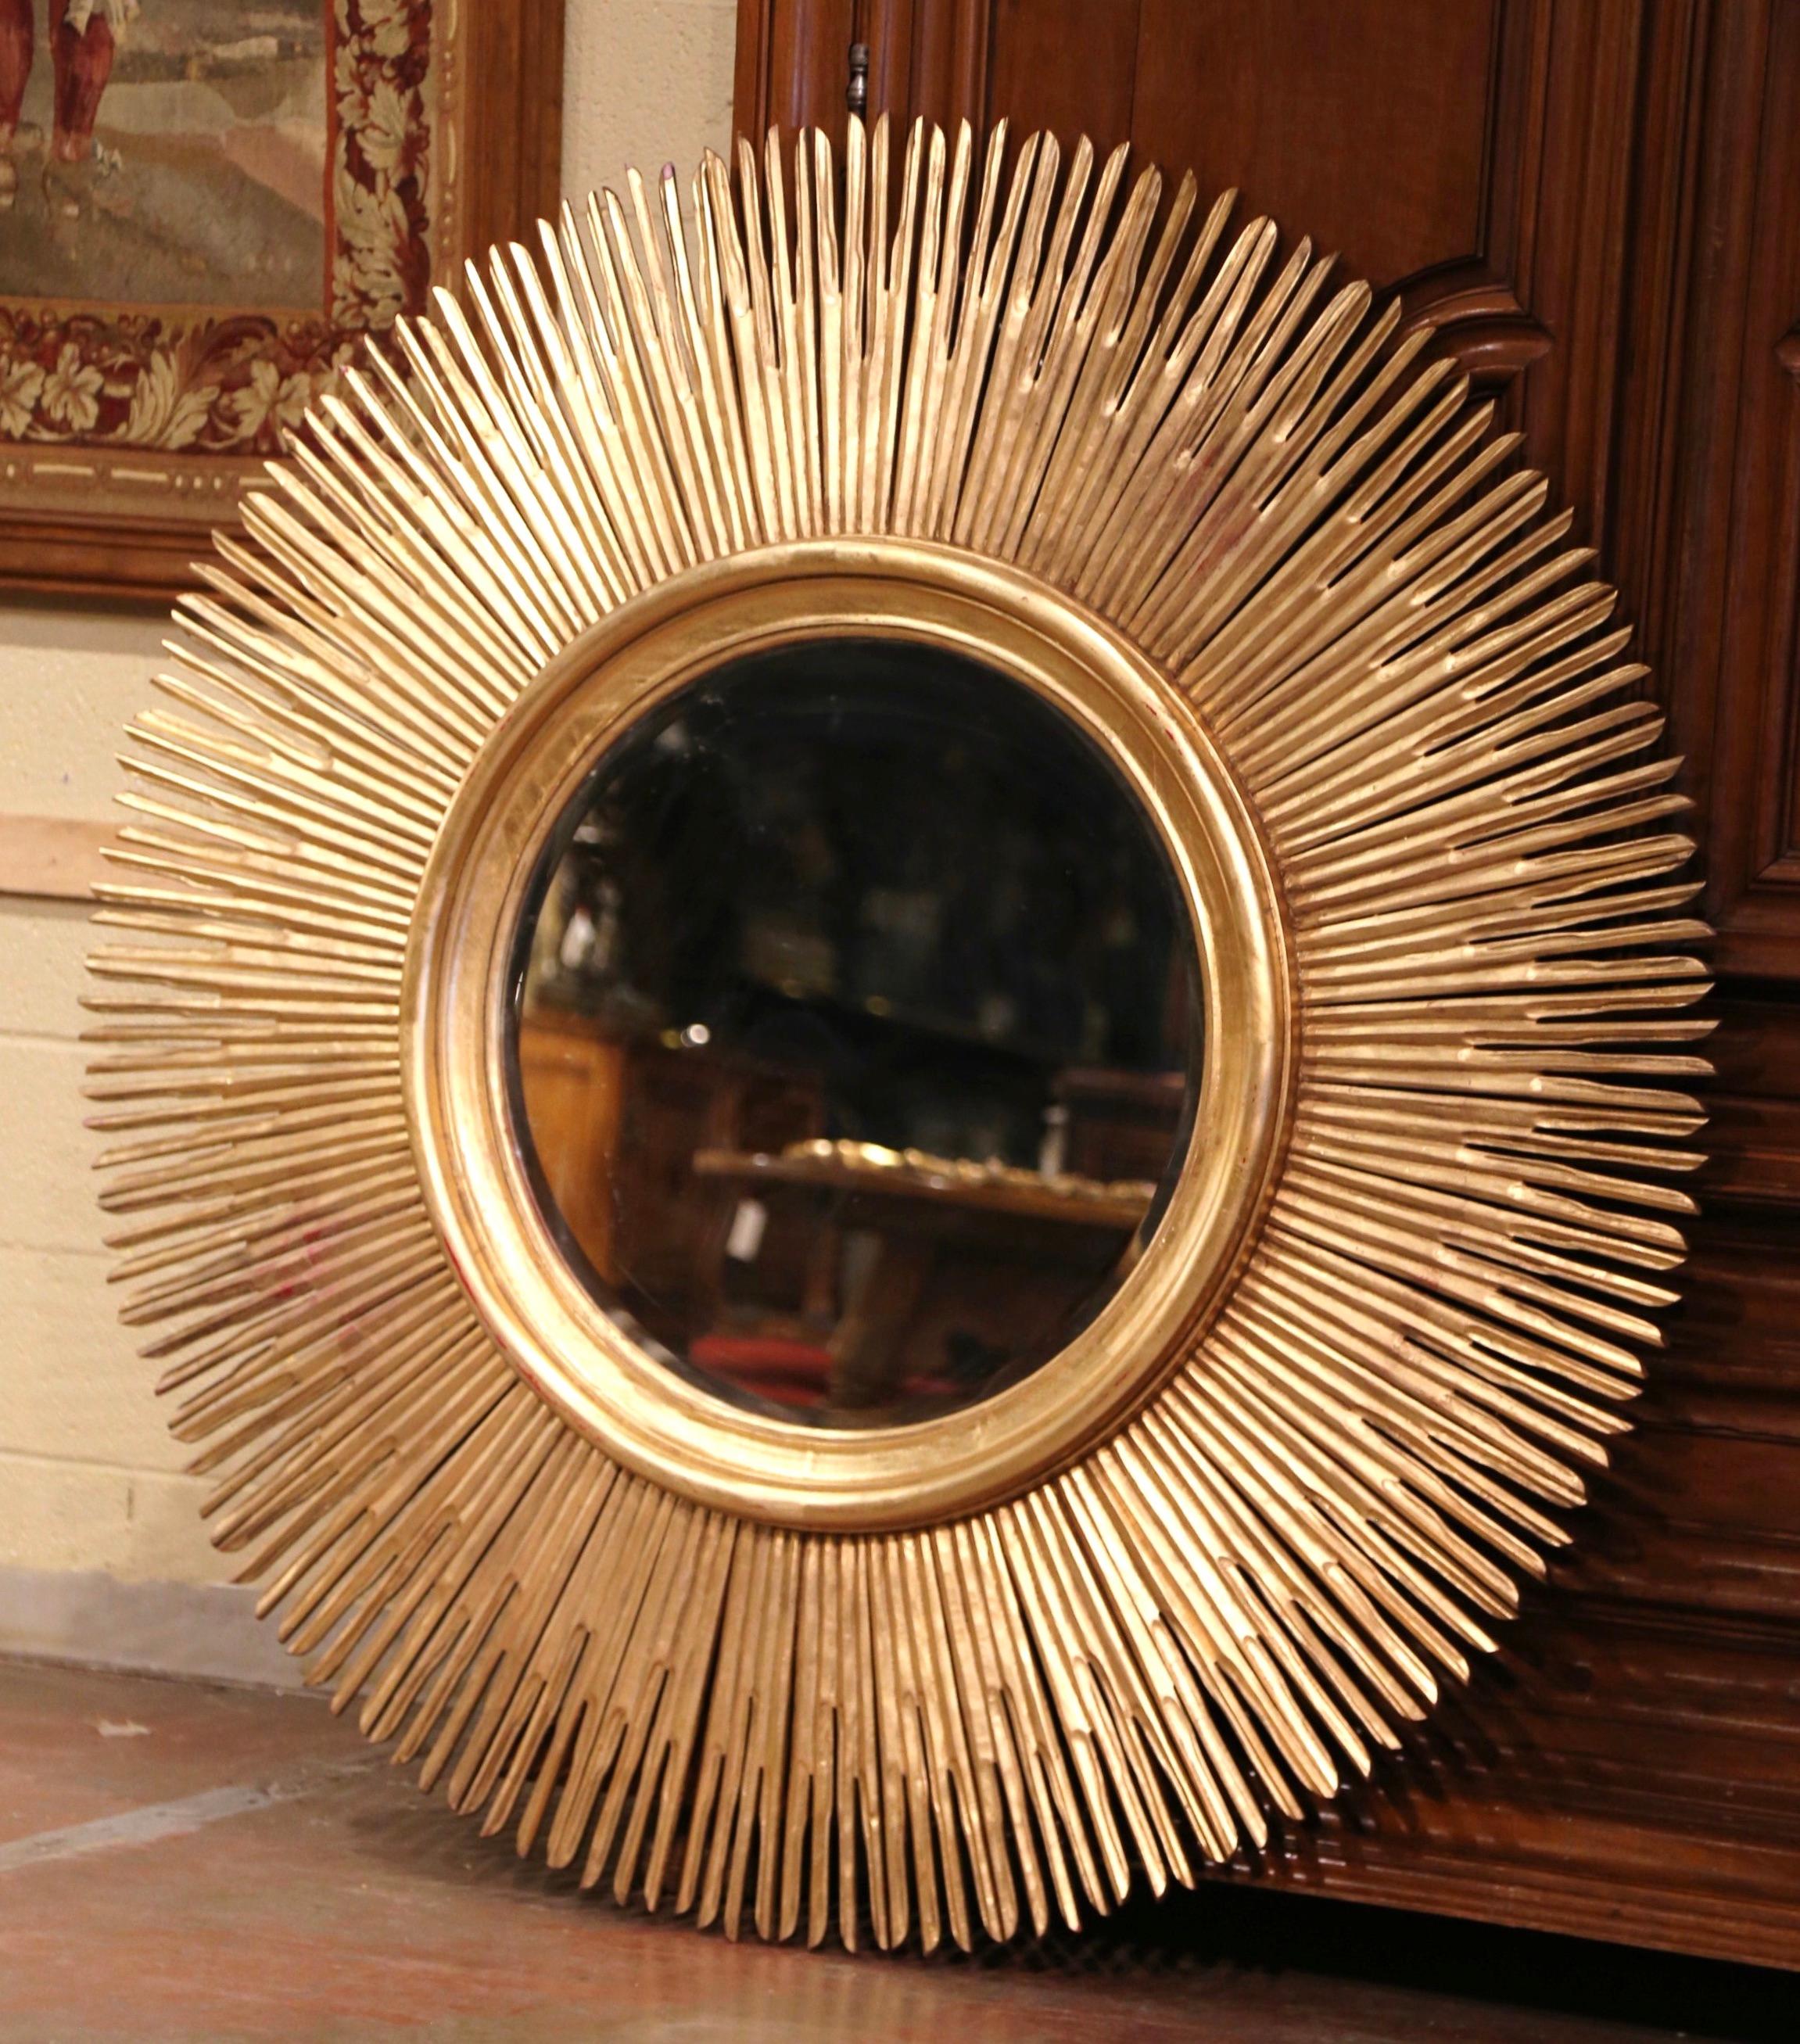 Add a beautiful shine to your home with this important eye-catching sun mirror. Created in Italy circa 2010, the large vintage mirror has a classic sunbeam shape with outstretching rays, a central circular beveled mirror plate encircled by a carved